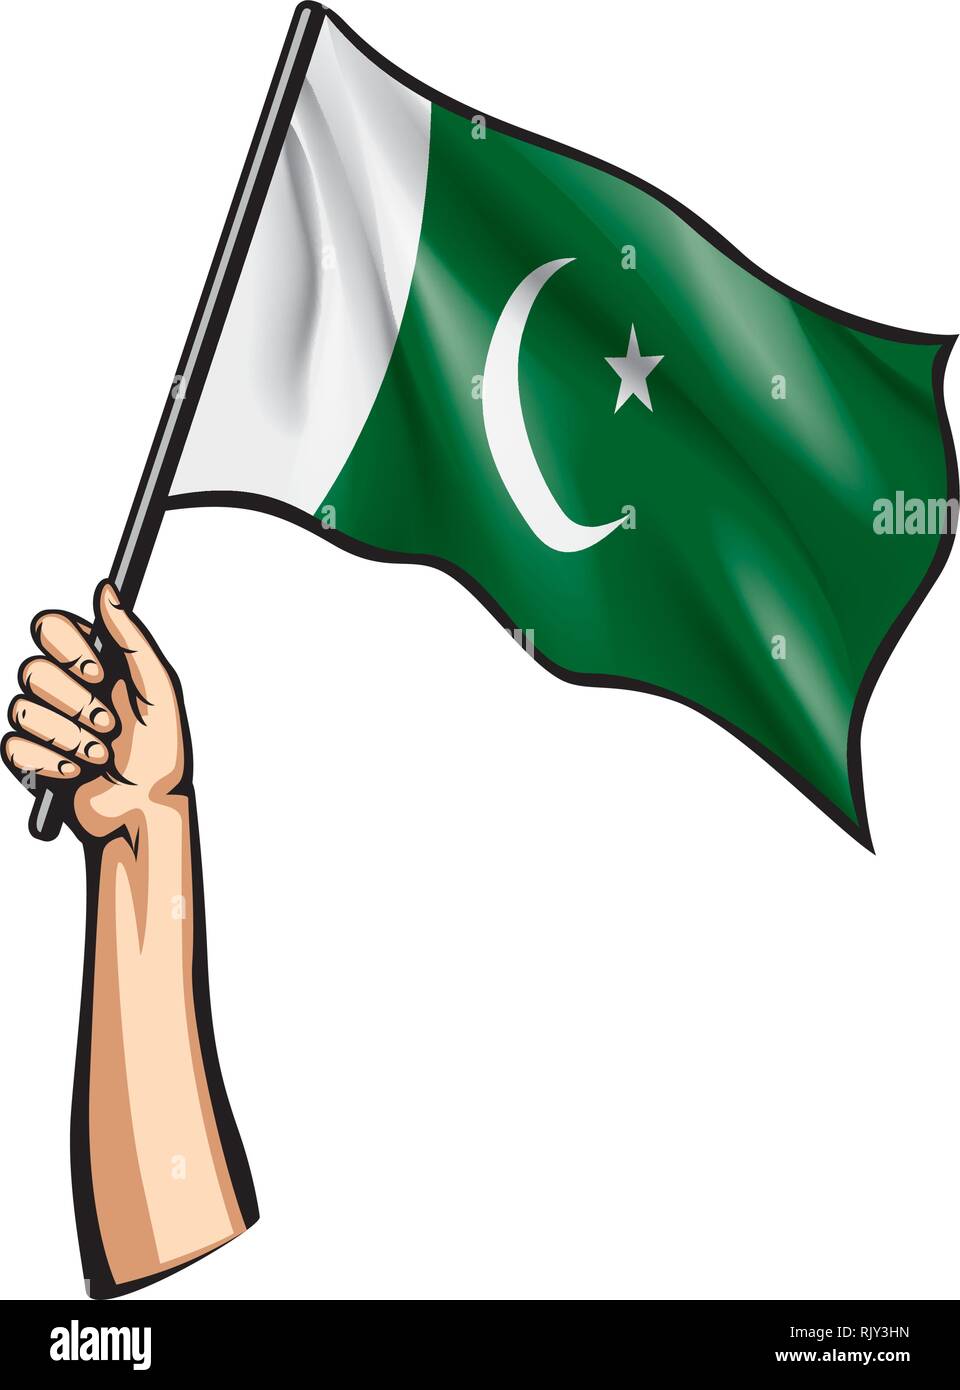 Pakistan flag and hand on white background. Vector illustration Stock Vector